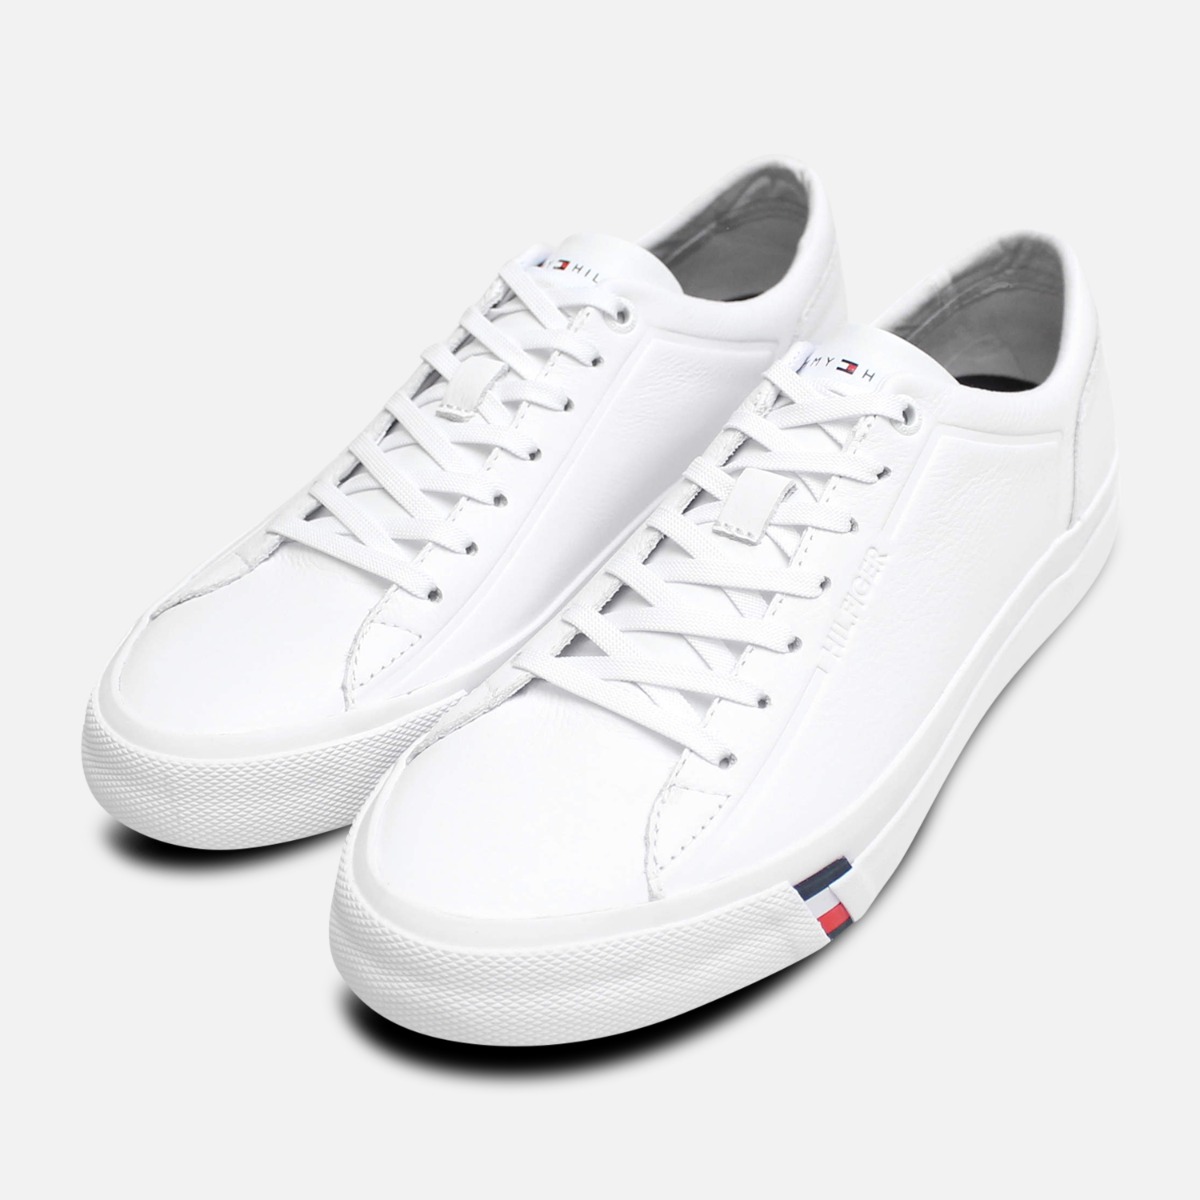 white leather sneakers tommy hilfiger